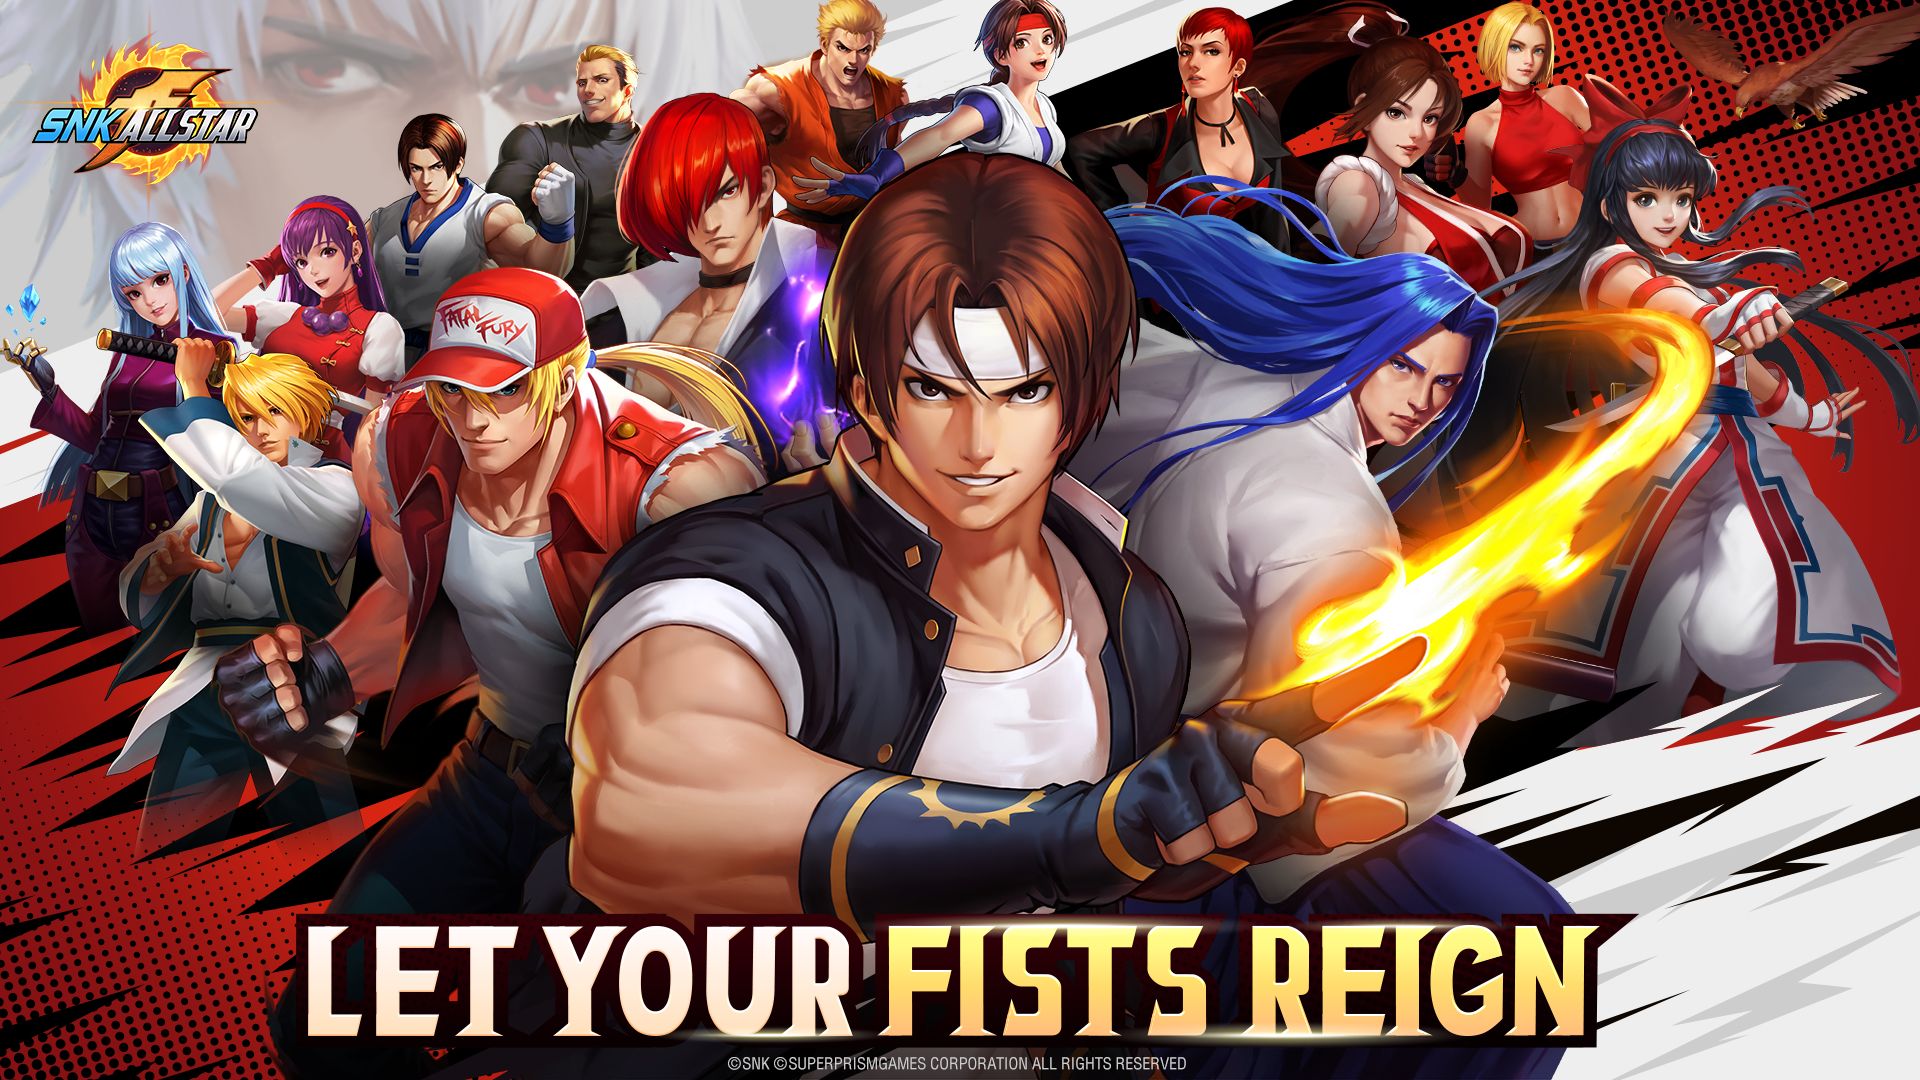 SNK Allstar for Android